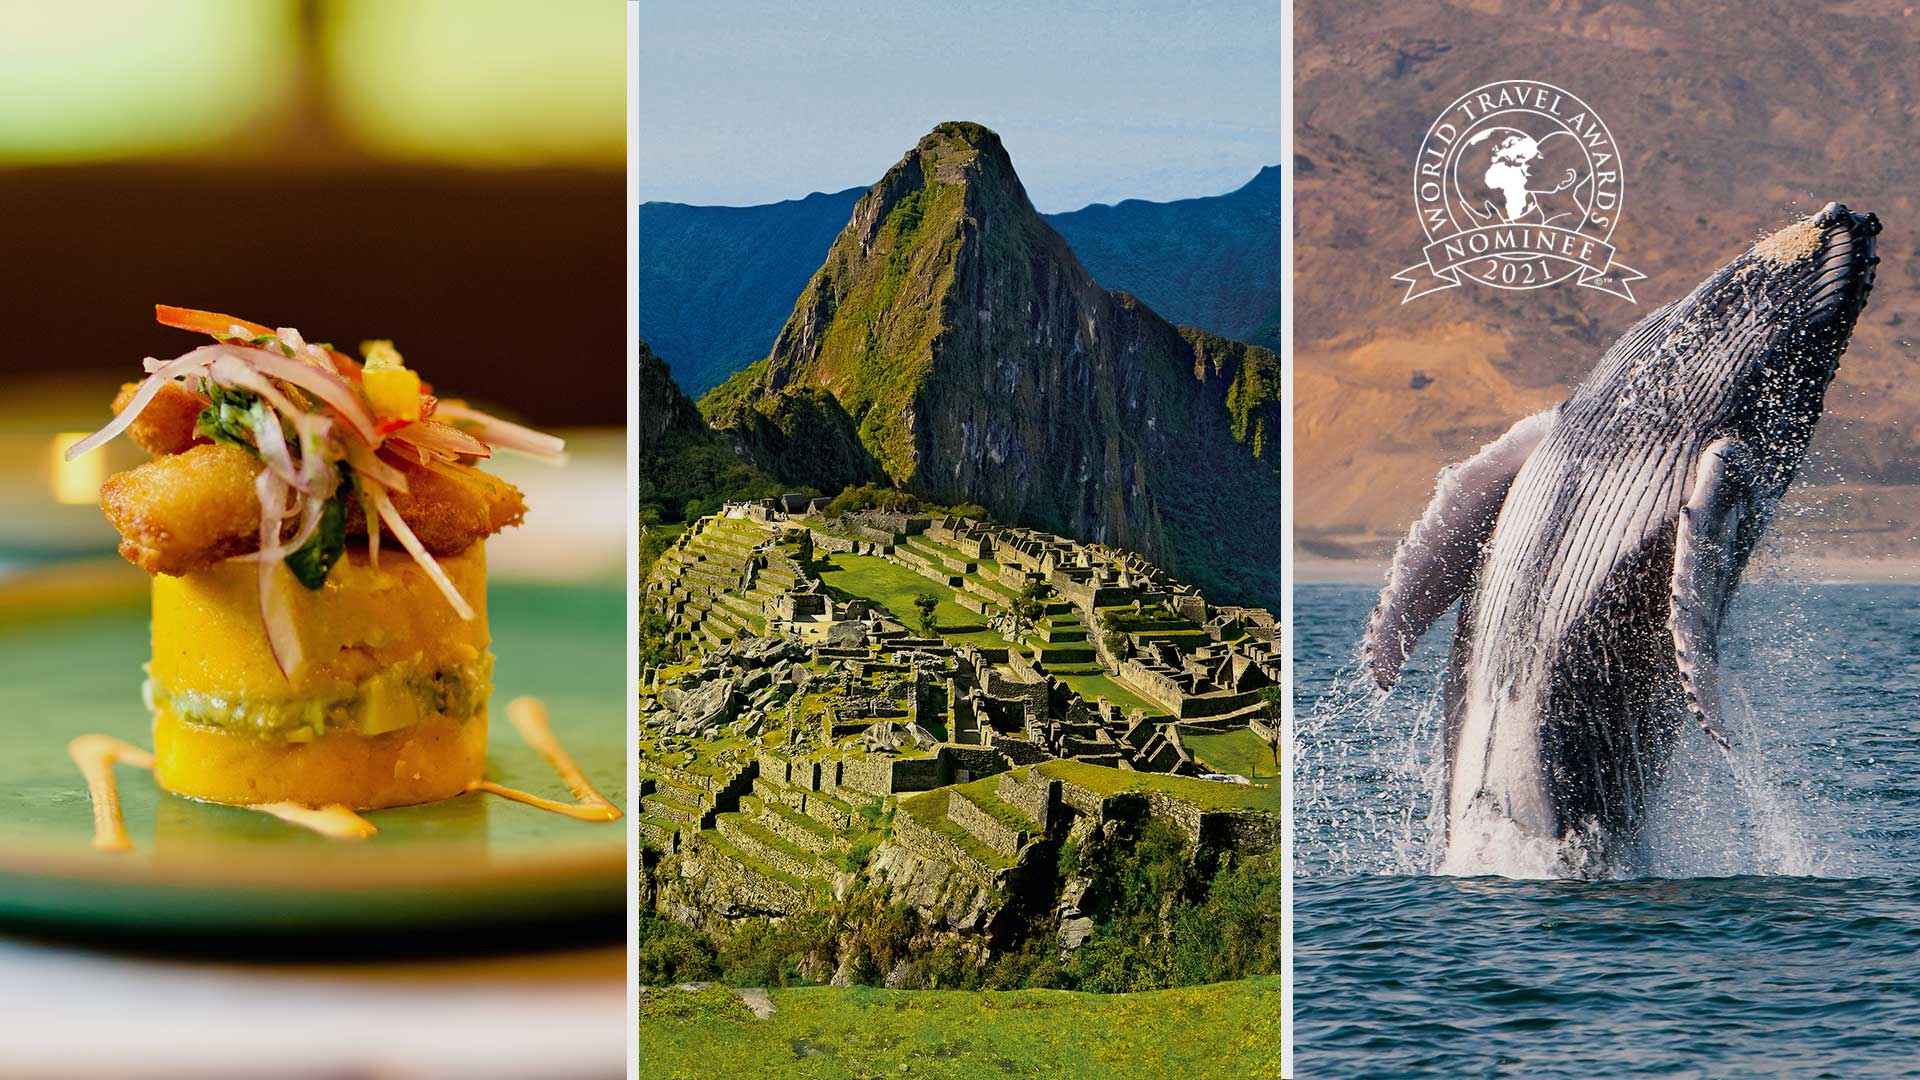 Peru obtains 18 nominations at the World Travel Awards 2022 South America